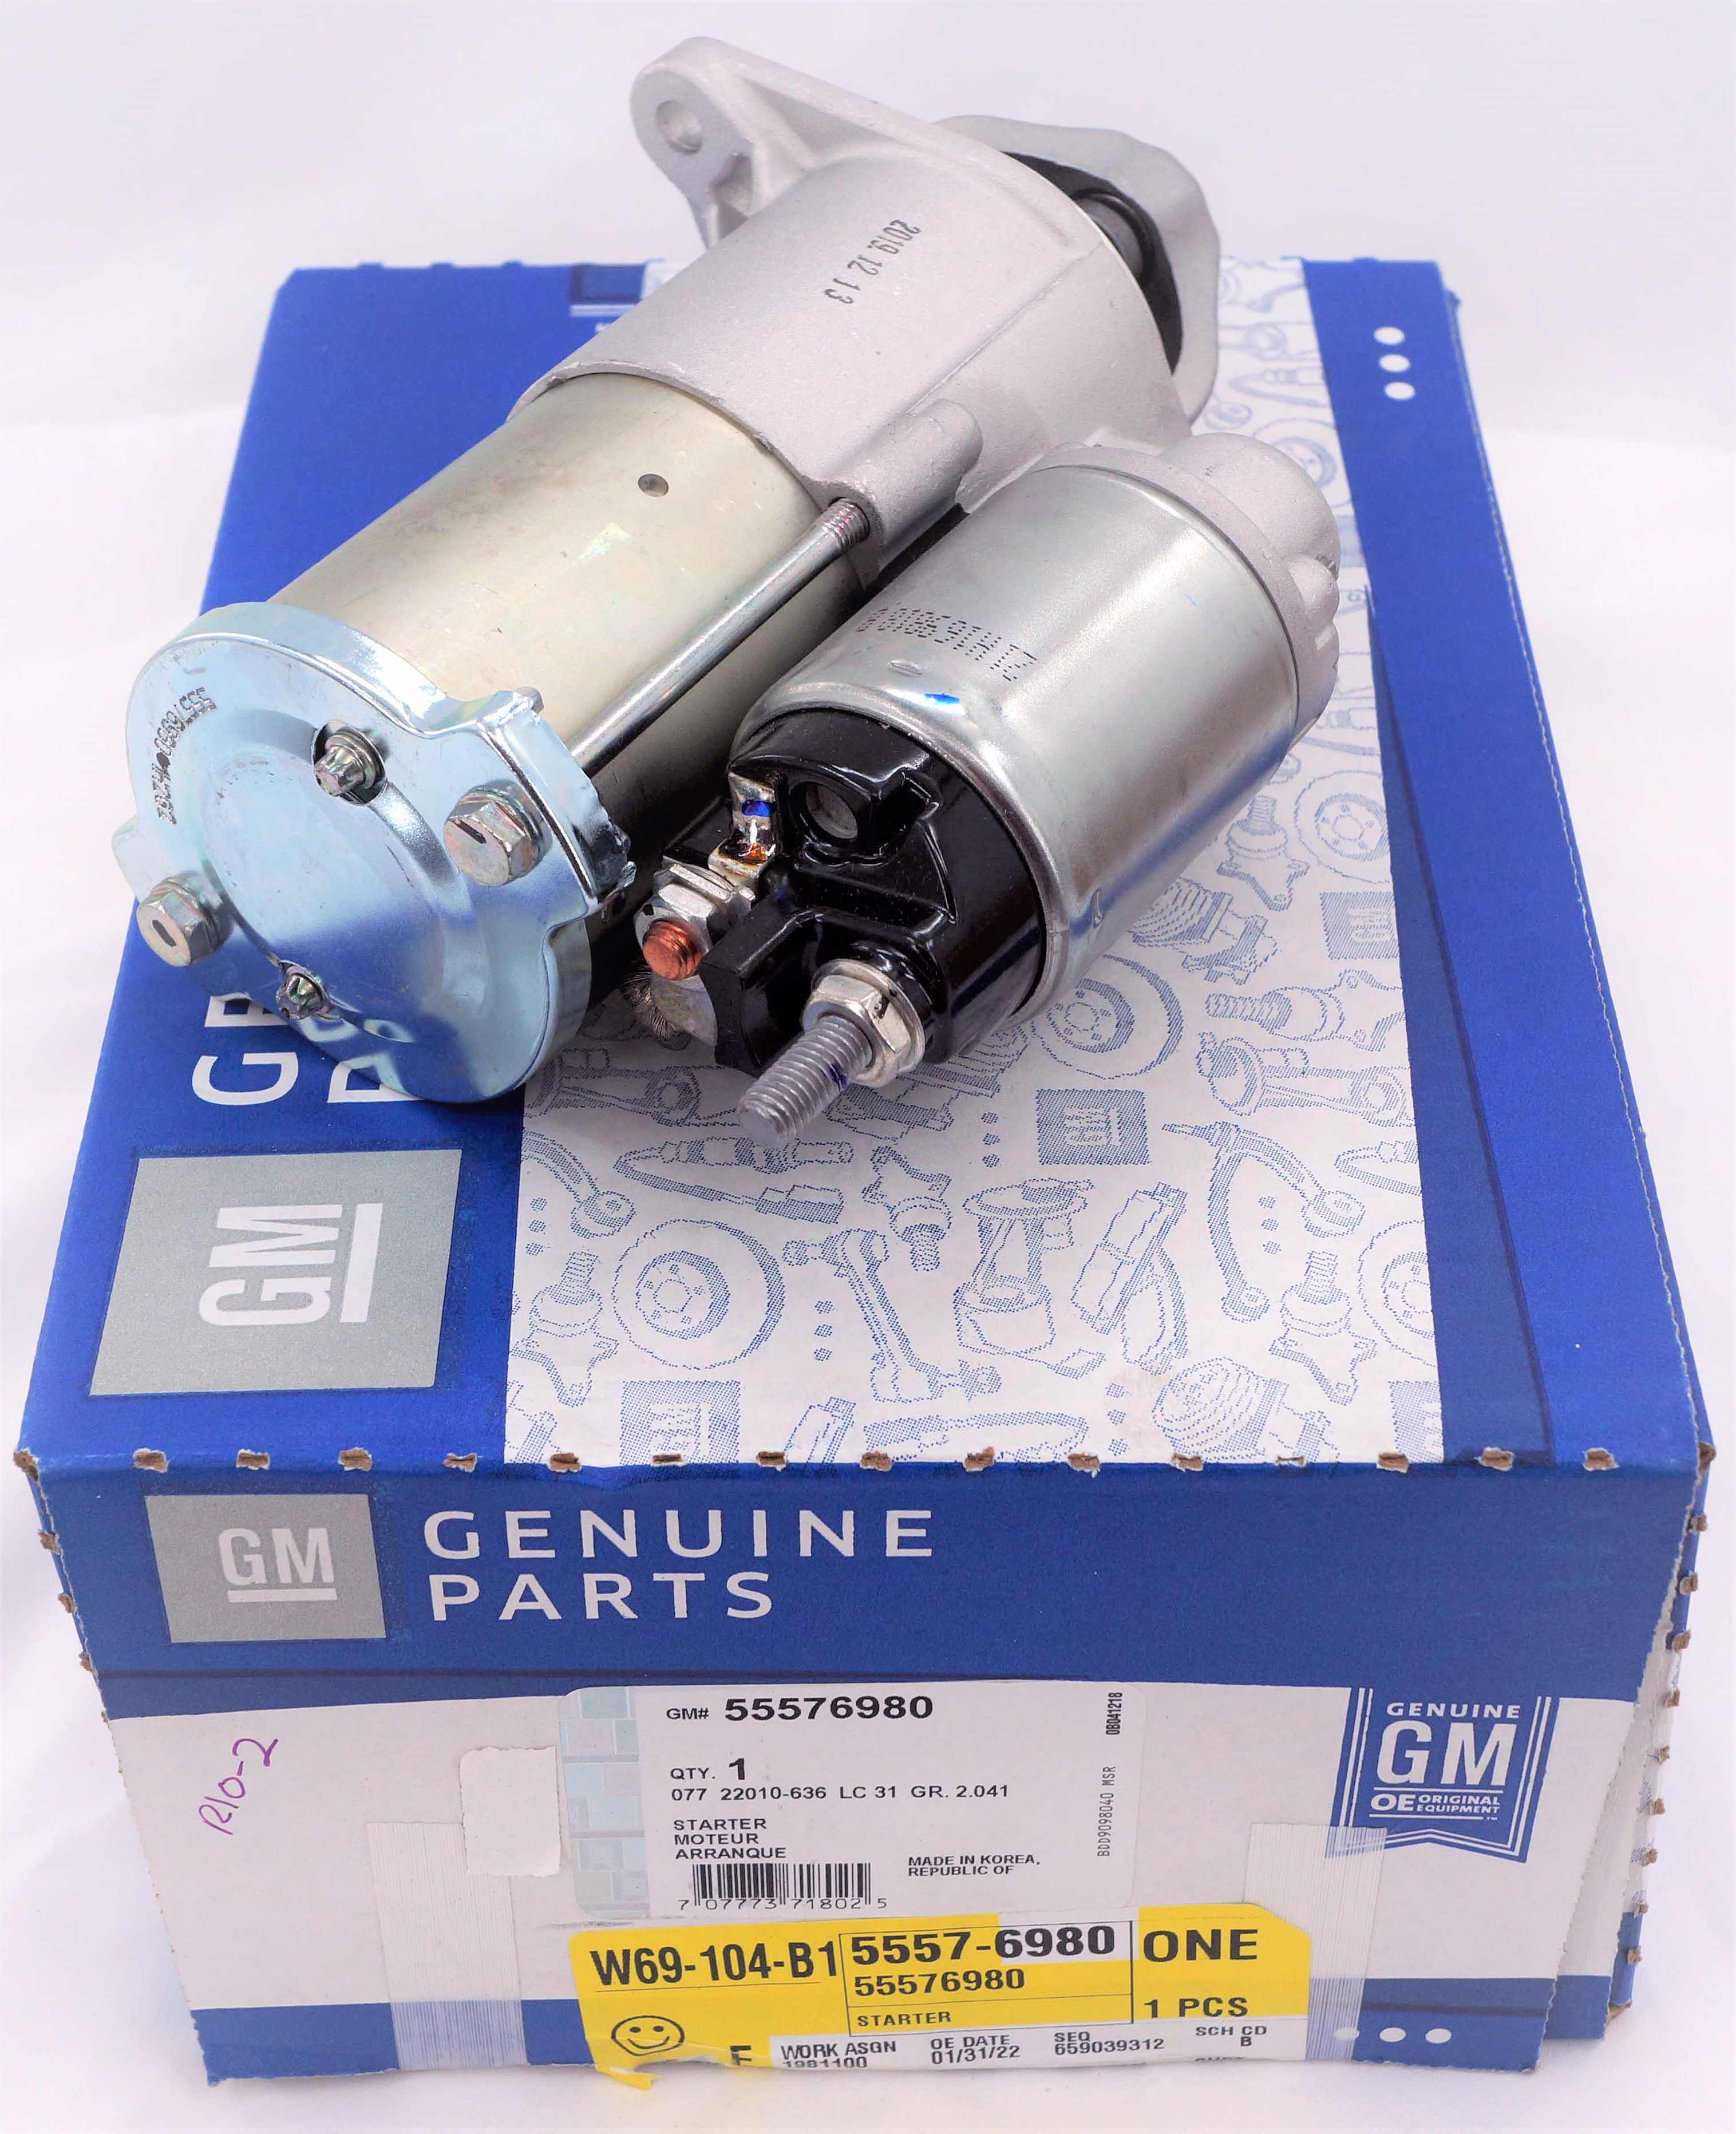 Genuine OEM 55576980 GM Starter Motor Fits Chevy Cruze and Sonic - image 1